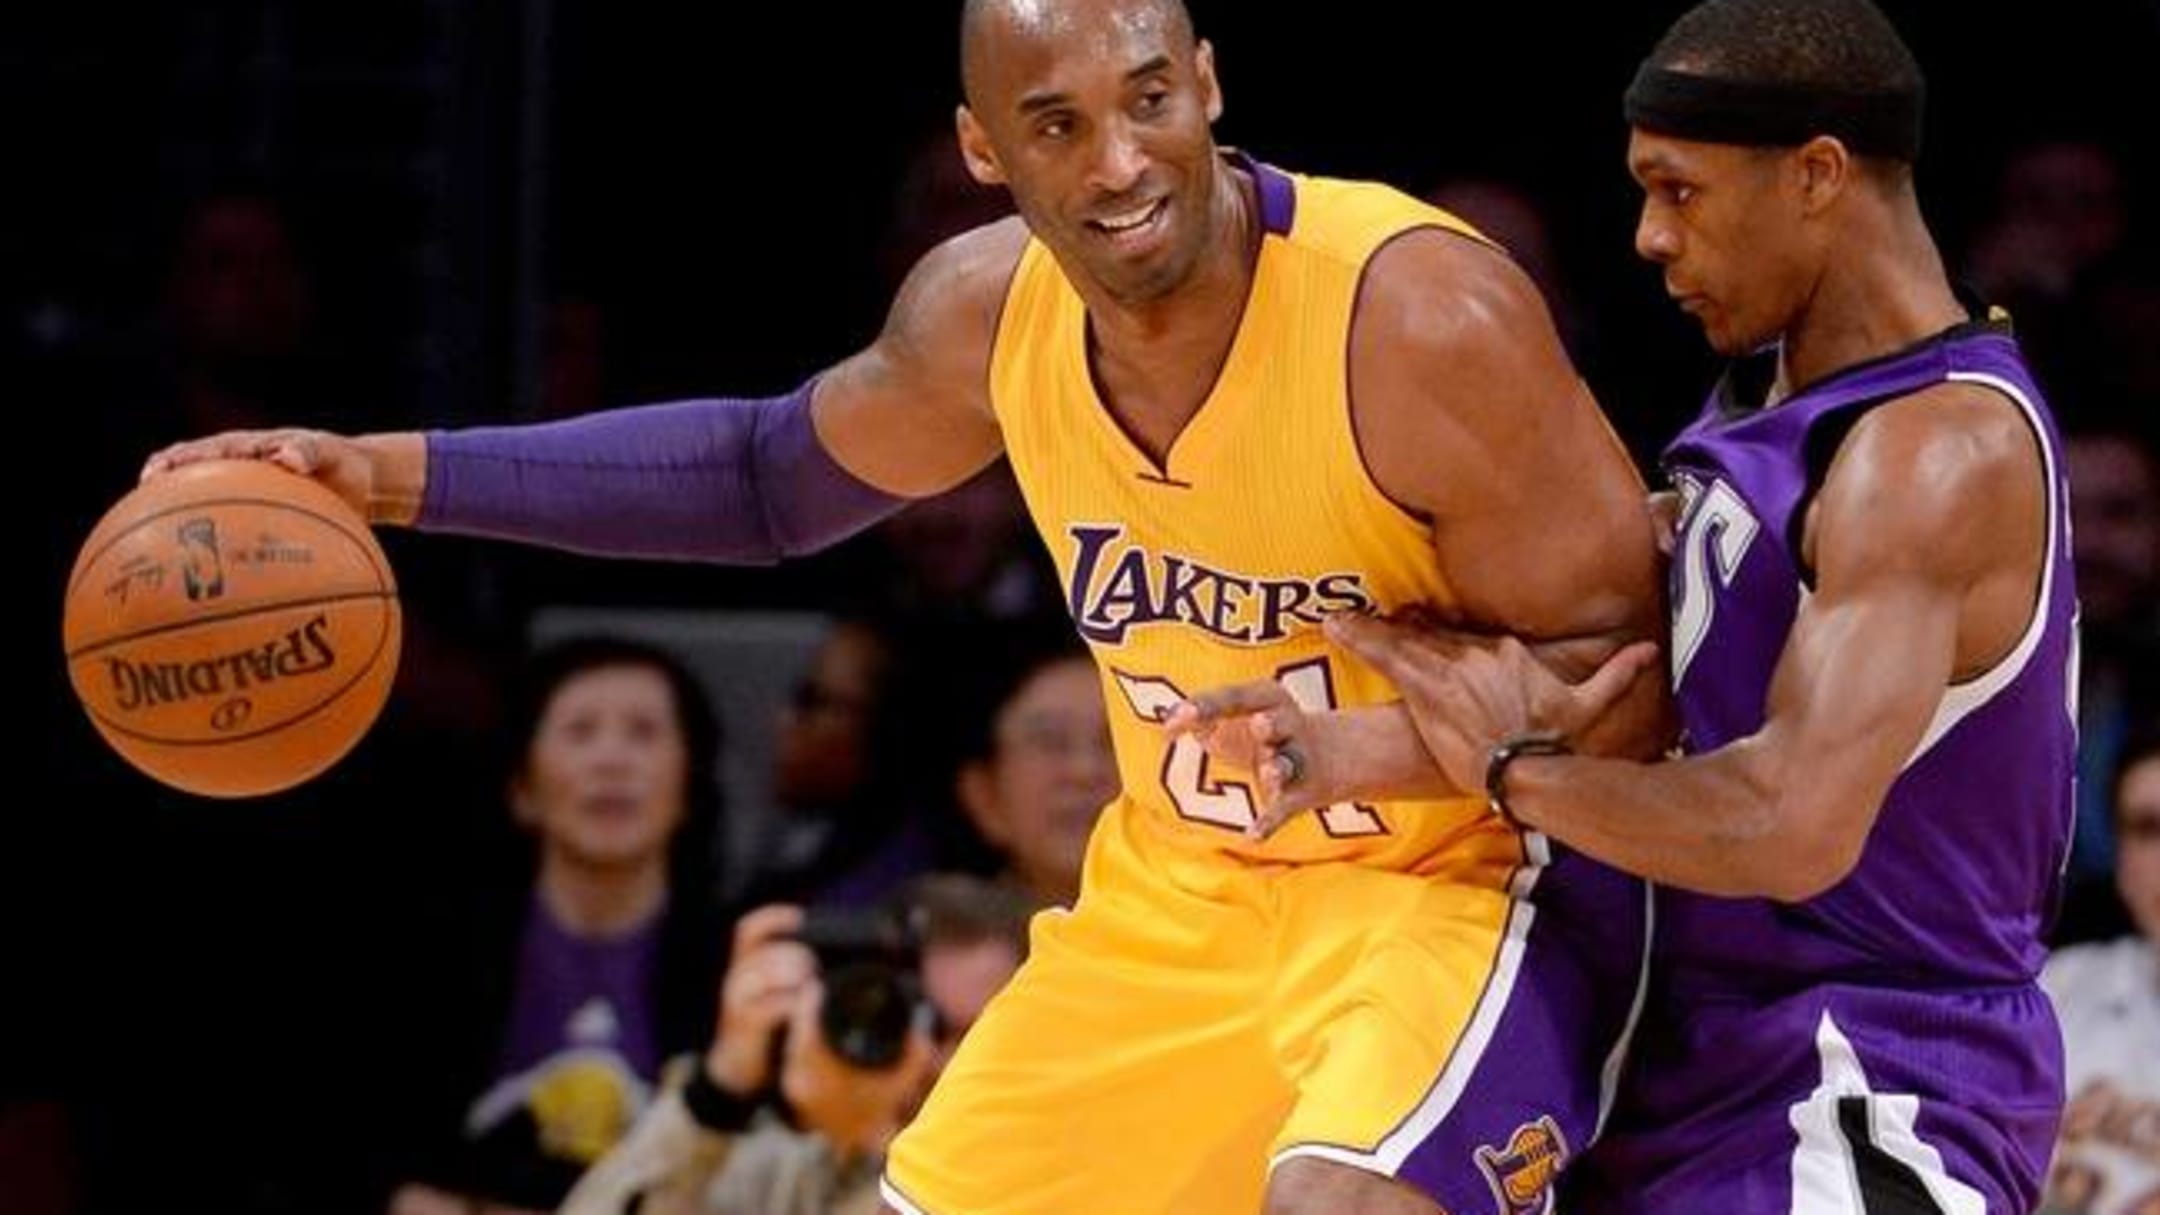 Kobe Bryant's 24 most iconic moments during his 20-year NBA career